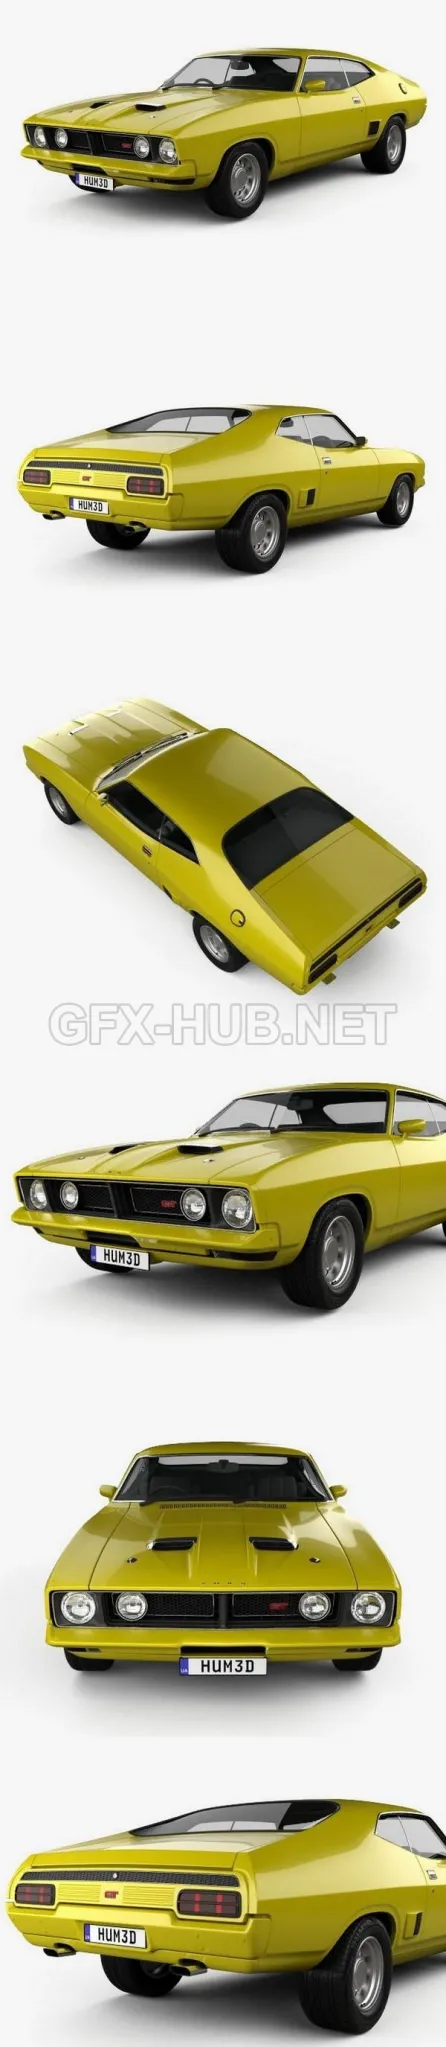 CAR – Ford Falcon GT Coupe 1973  3D Model